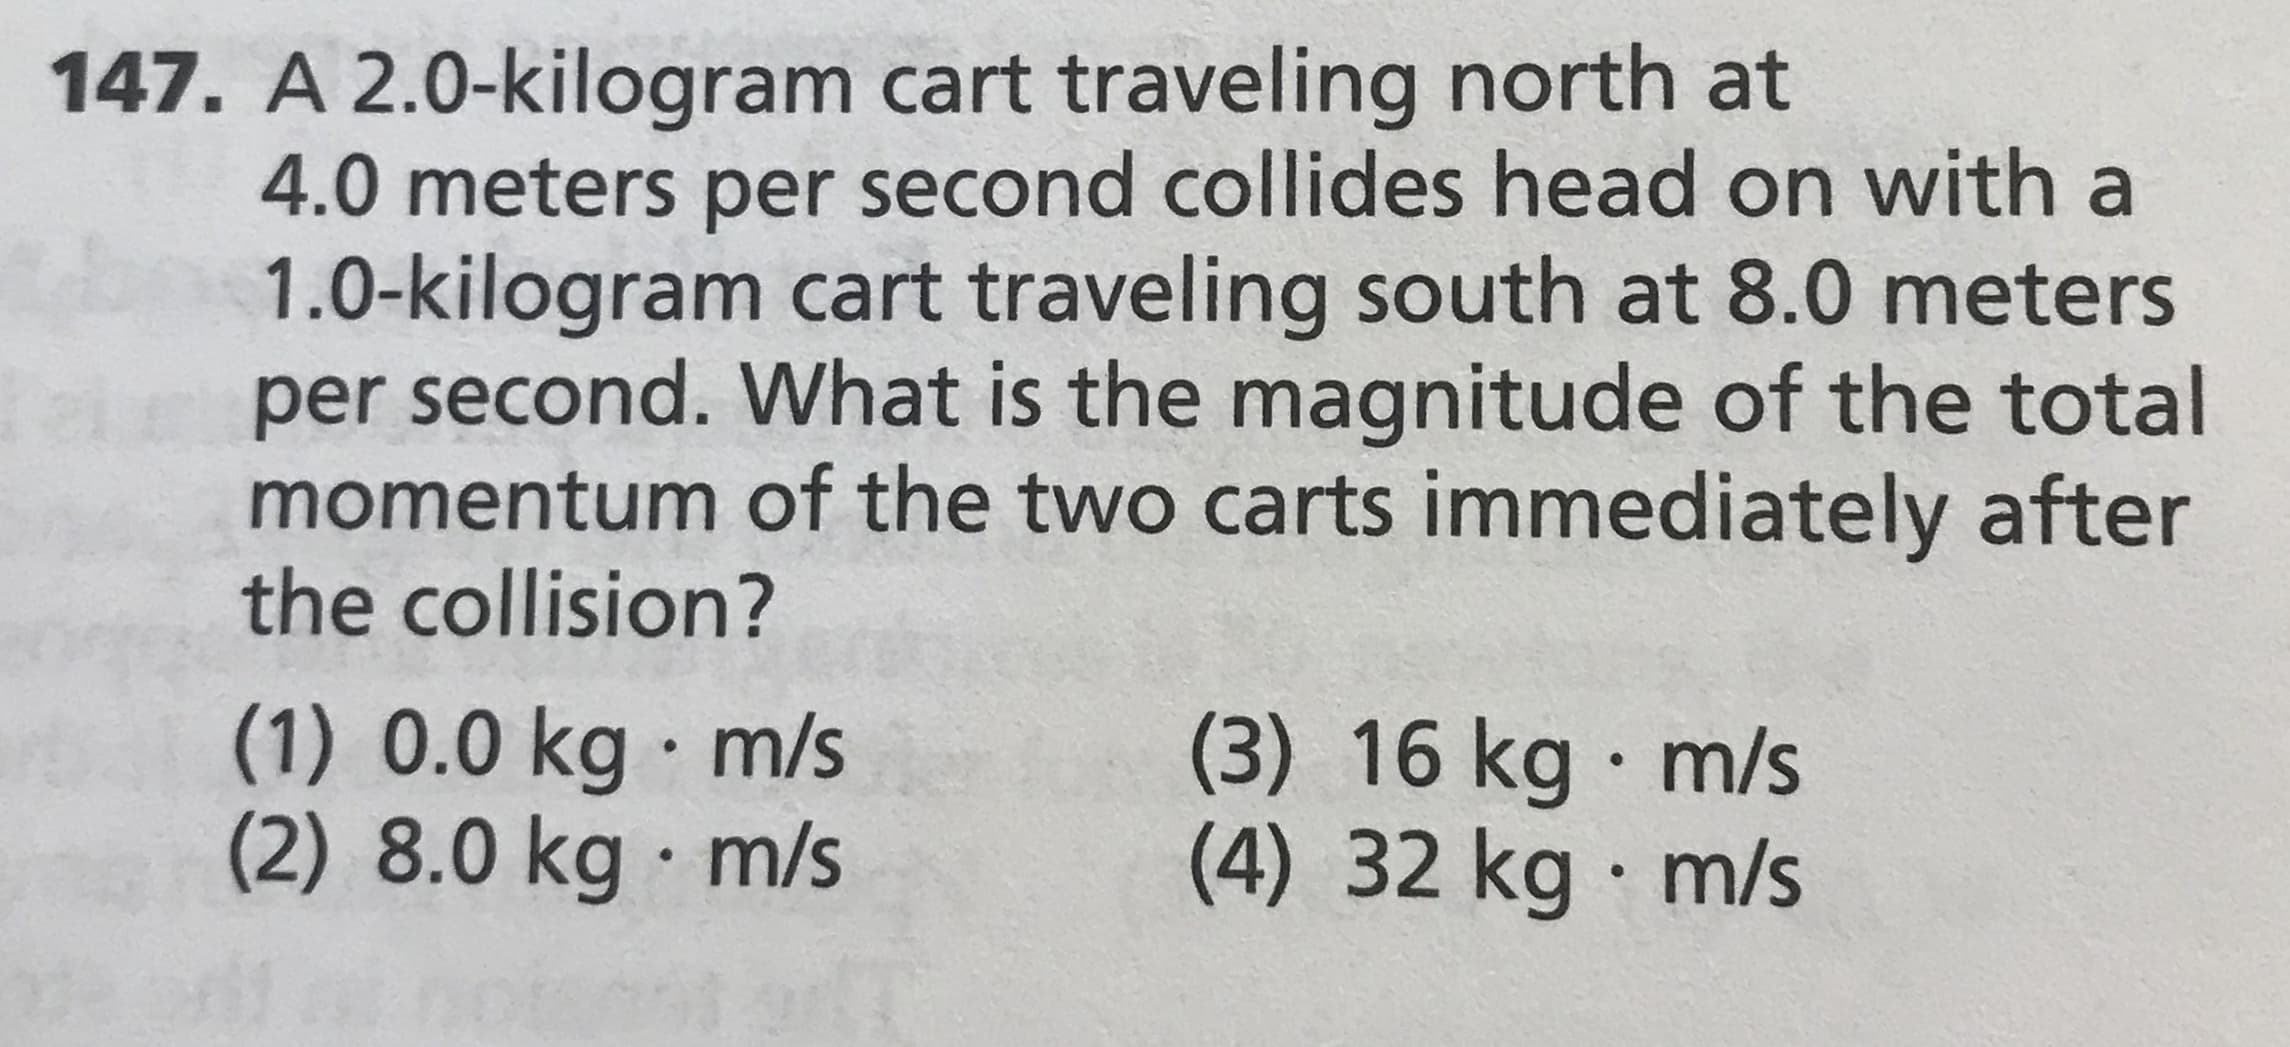 147. A 2.0-kilogram cart traveling north at
4.0 meters per second collides head on with a
1.0-kilogram cart traveling south at 8.0 meters
iper second. What is the magnitude of the total
momentum of the two carts immediately after
the collision?
(1) 0.0 kg m/s
(2) 8.0 kg · m/s
(3) 16 kg m/s
(4) 32kg m/s
